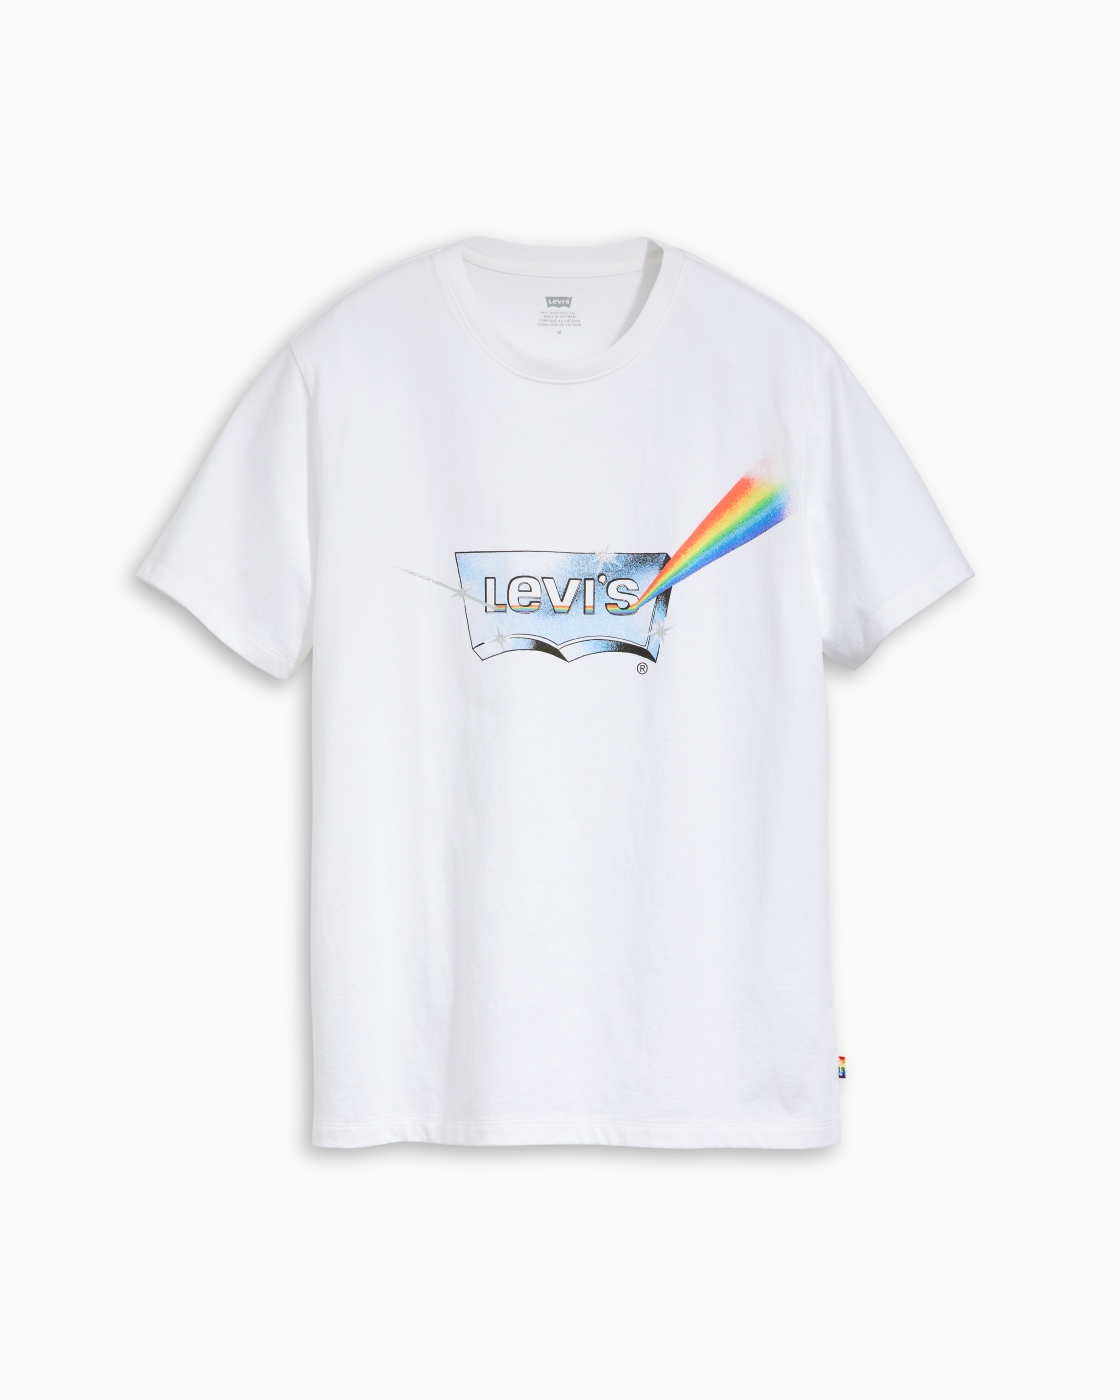 Levi’s Pride Community Graphic T-Shirt in white, with a chrome Levi’s logo and a rainbow beam